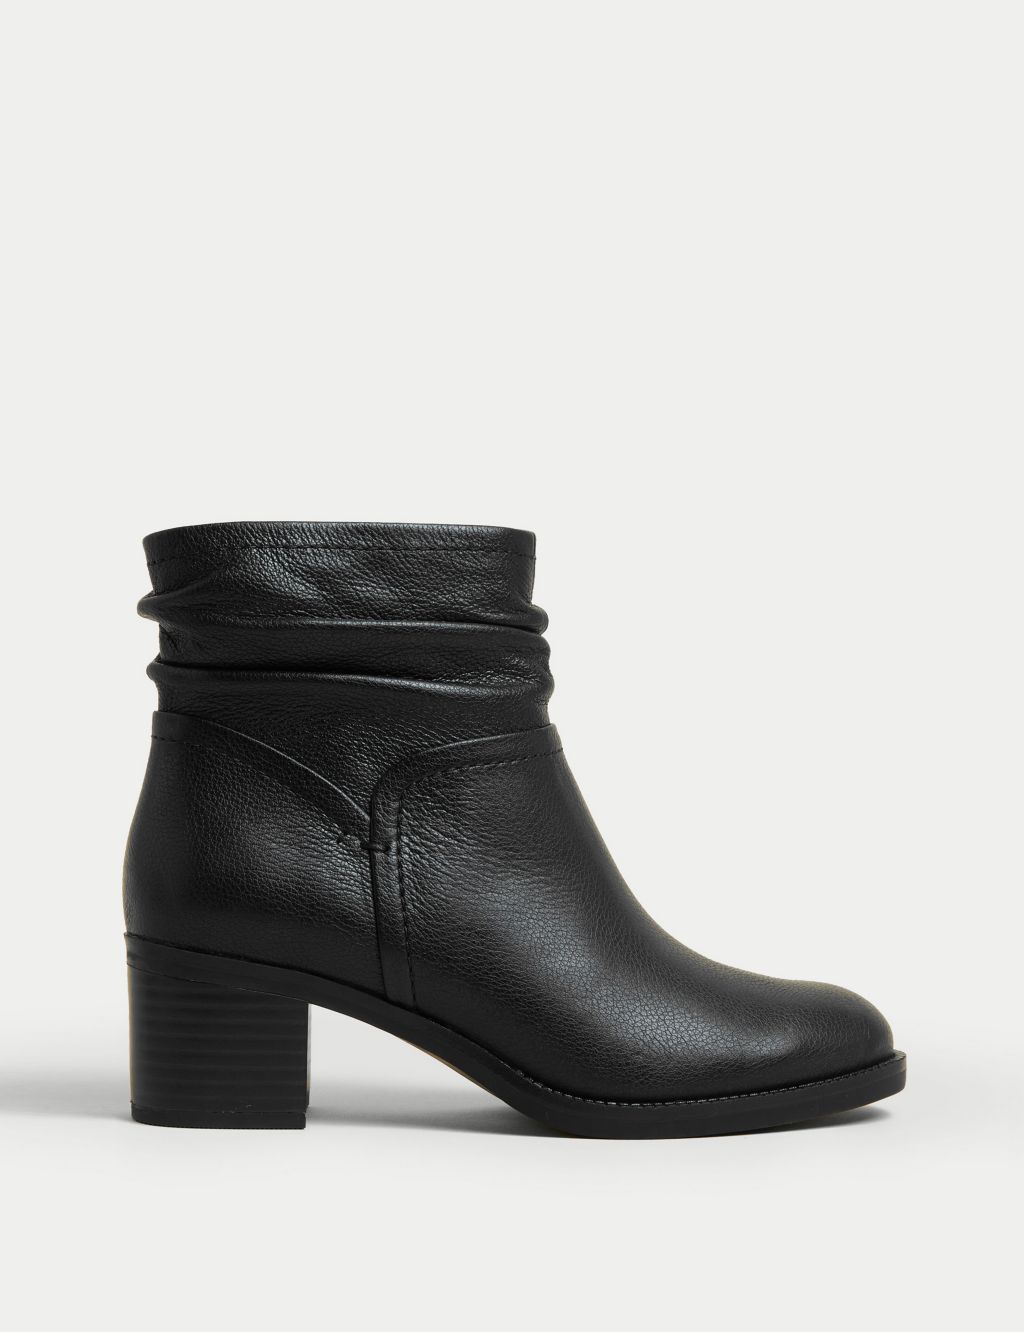 Wide Fit Leather Block Heel Ankle Boots image 1